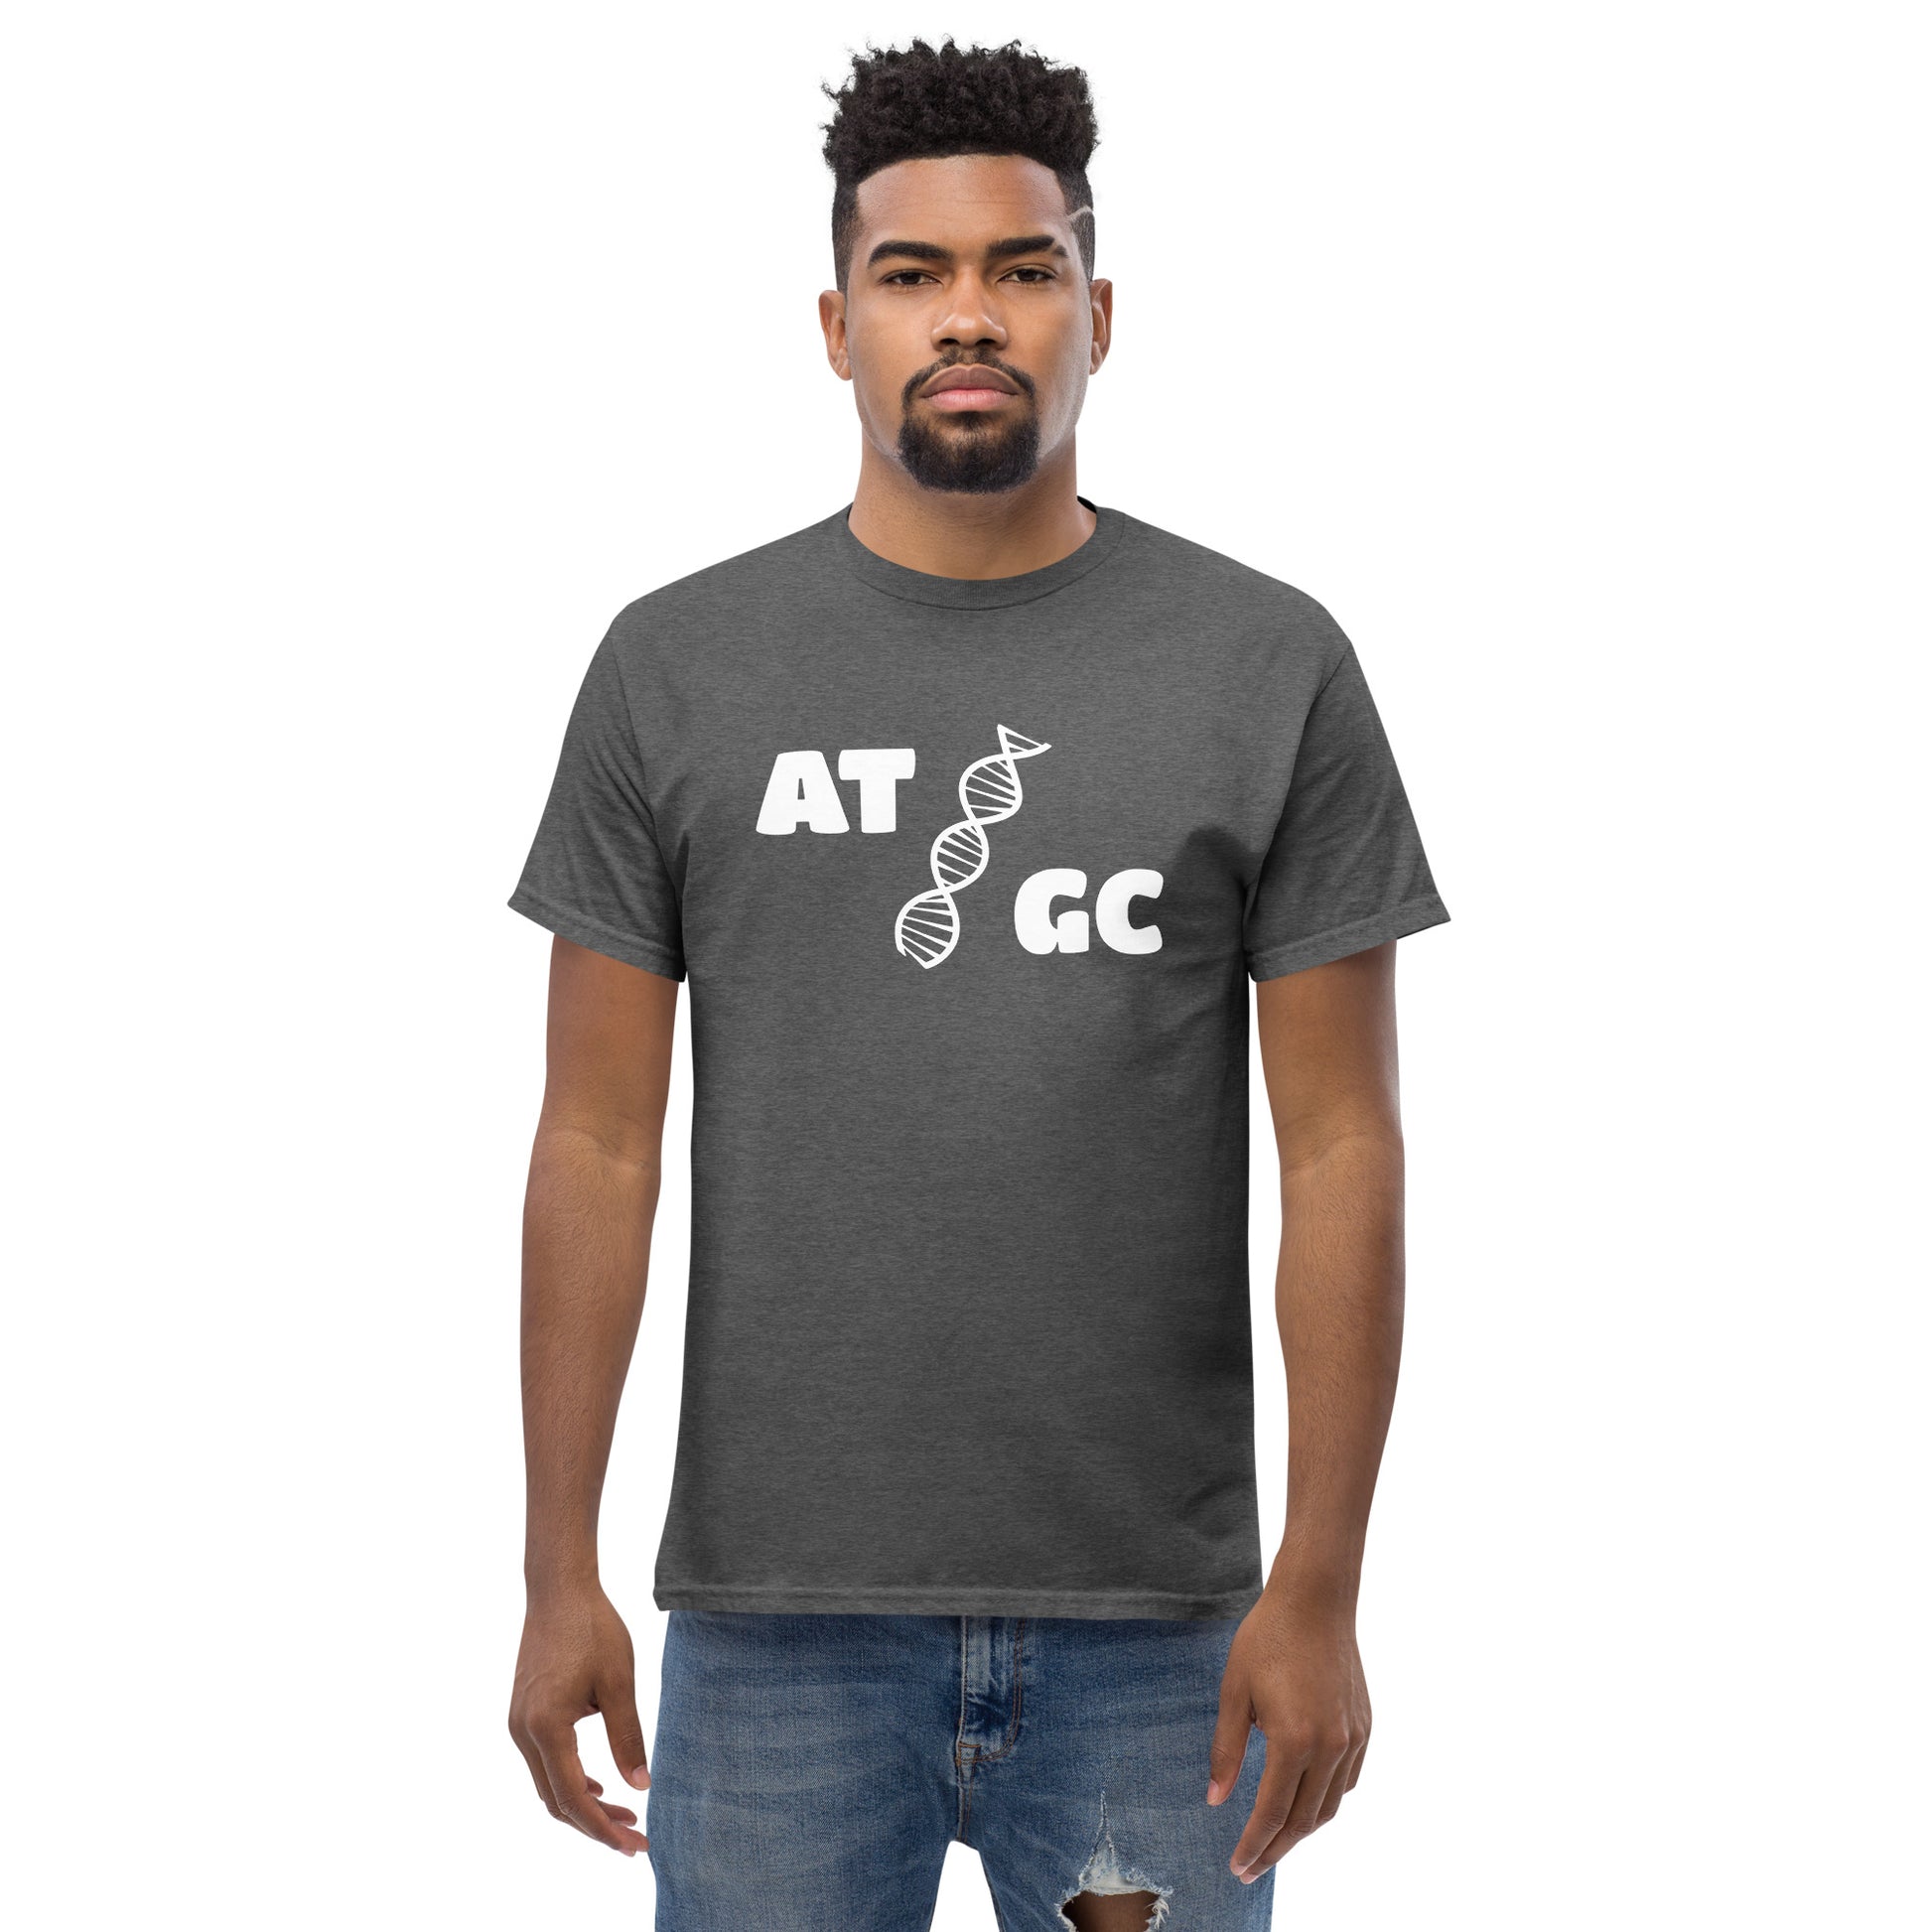 Men with dark grey t-shirt with image of a DNA string and the text "ATGC"